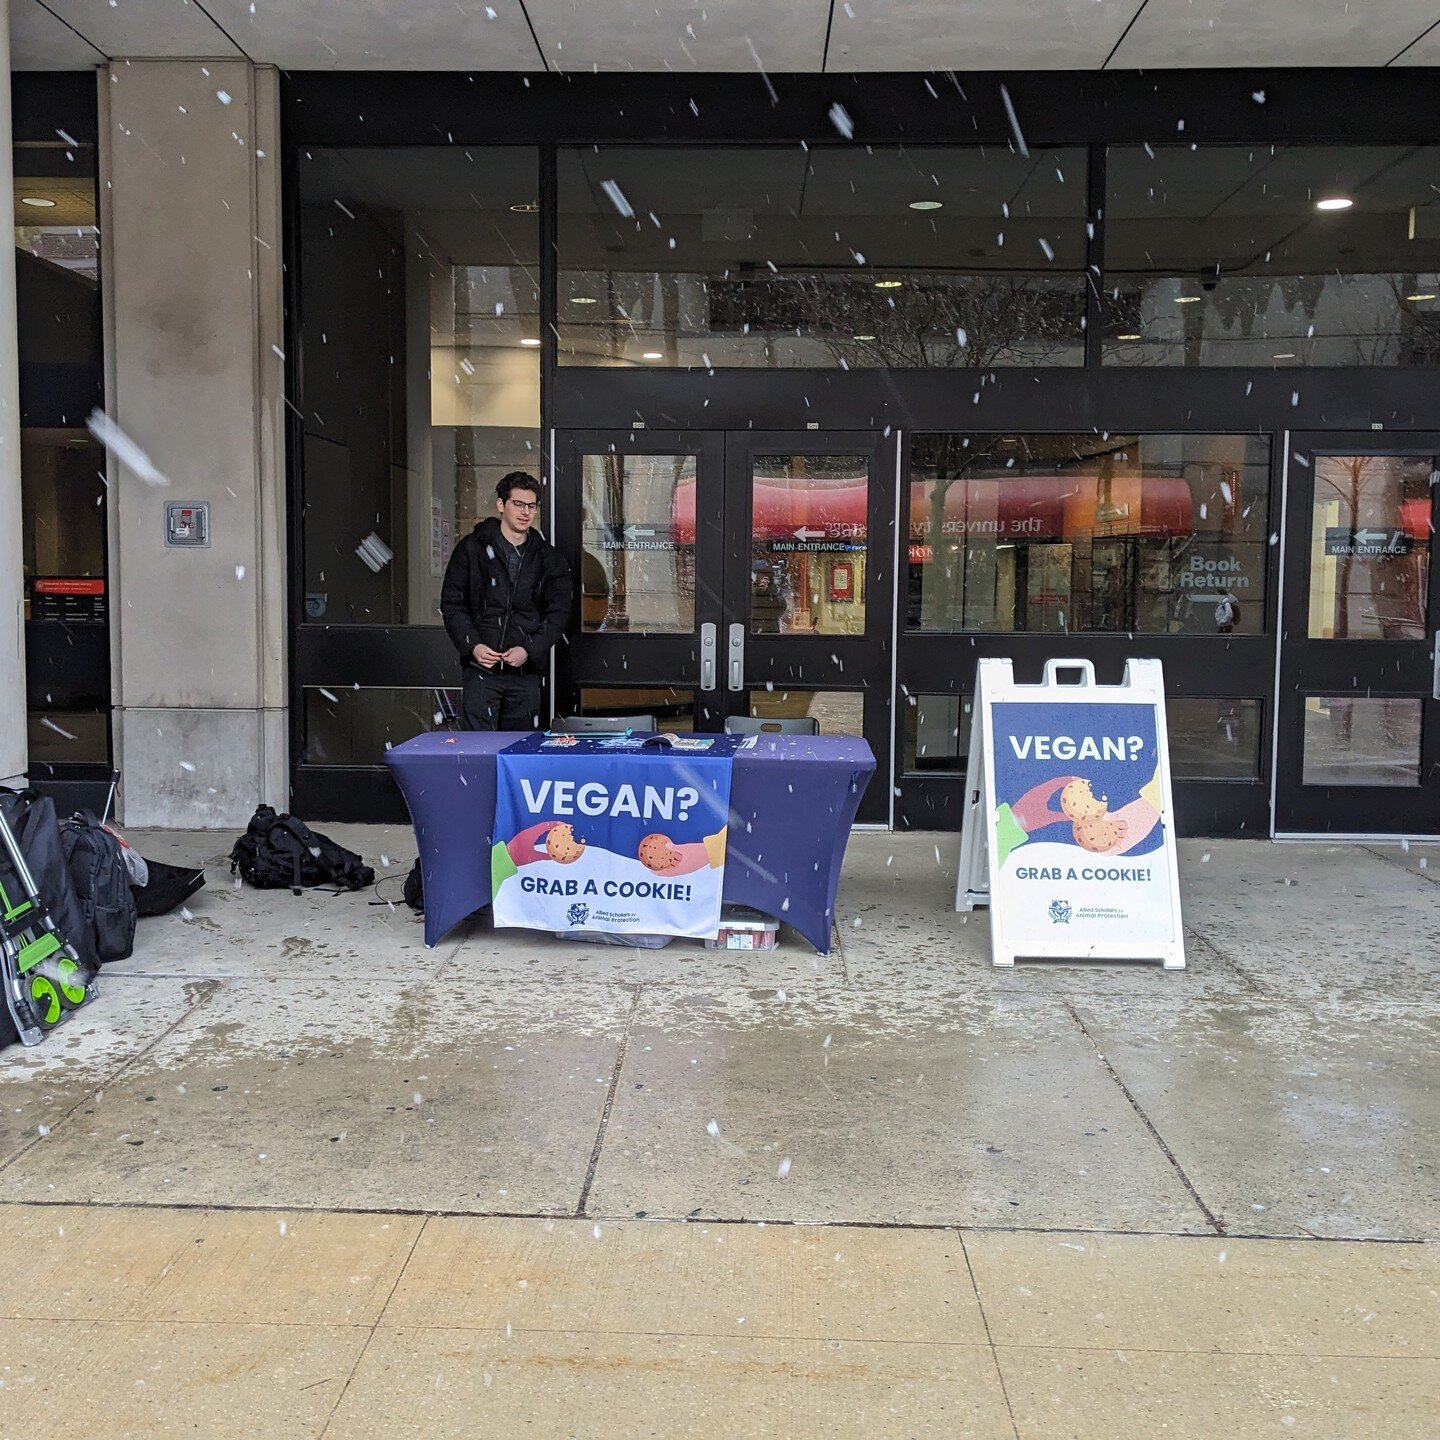 It's snowing but we're still out here!

Come graph a cookie, chat about veganism, and sign up for our email list. :)

alliedscholars.org/uwmadison